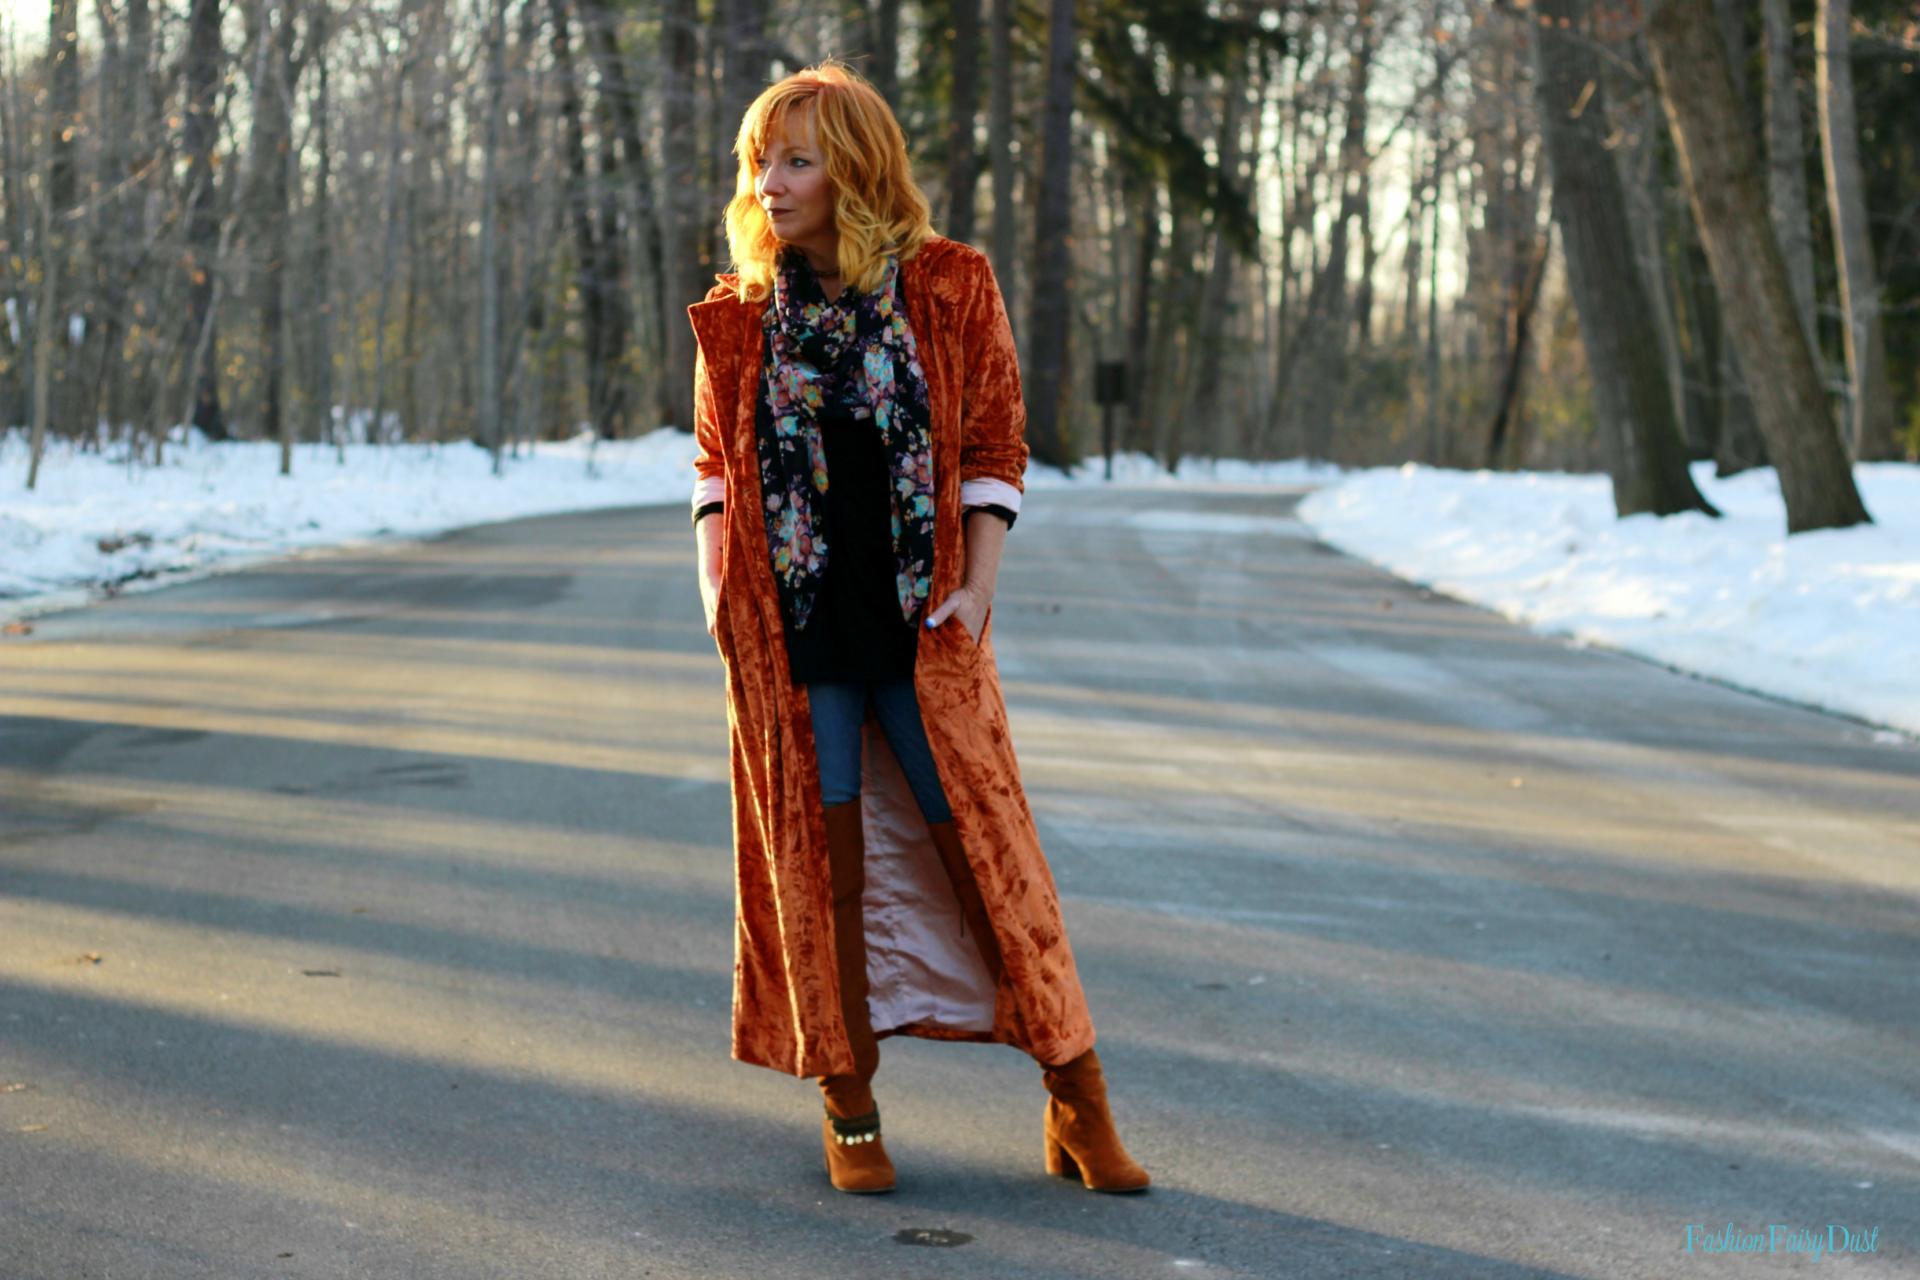 Rust velvet duster, brown over the knee boots and floral scarf. How to use one statement piece to make an outfit.